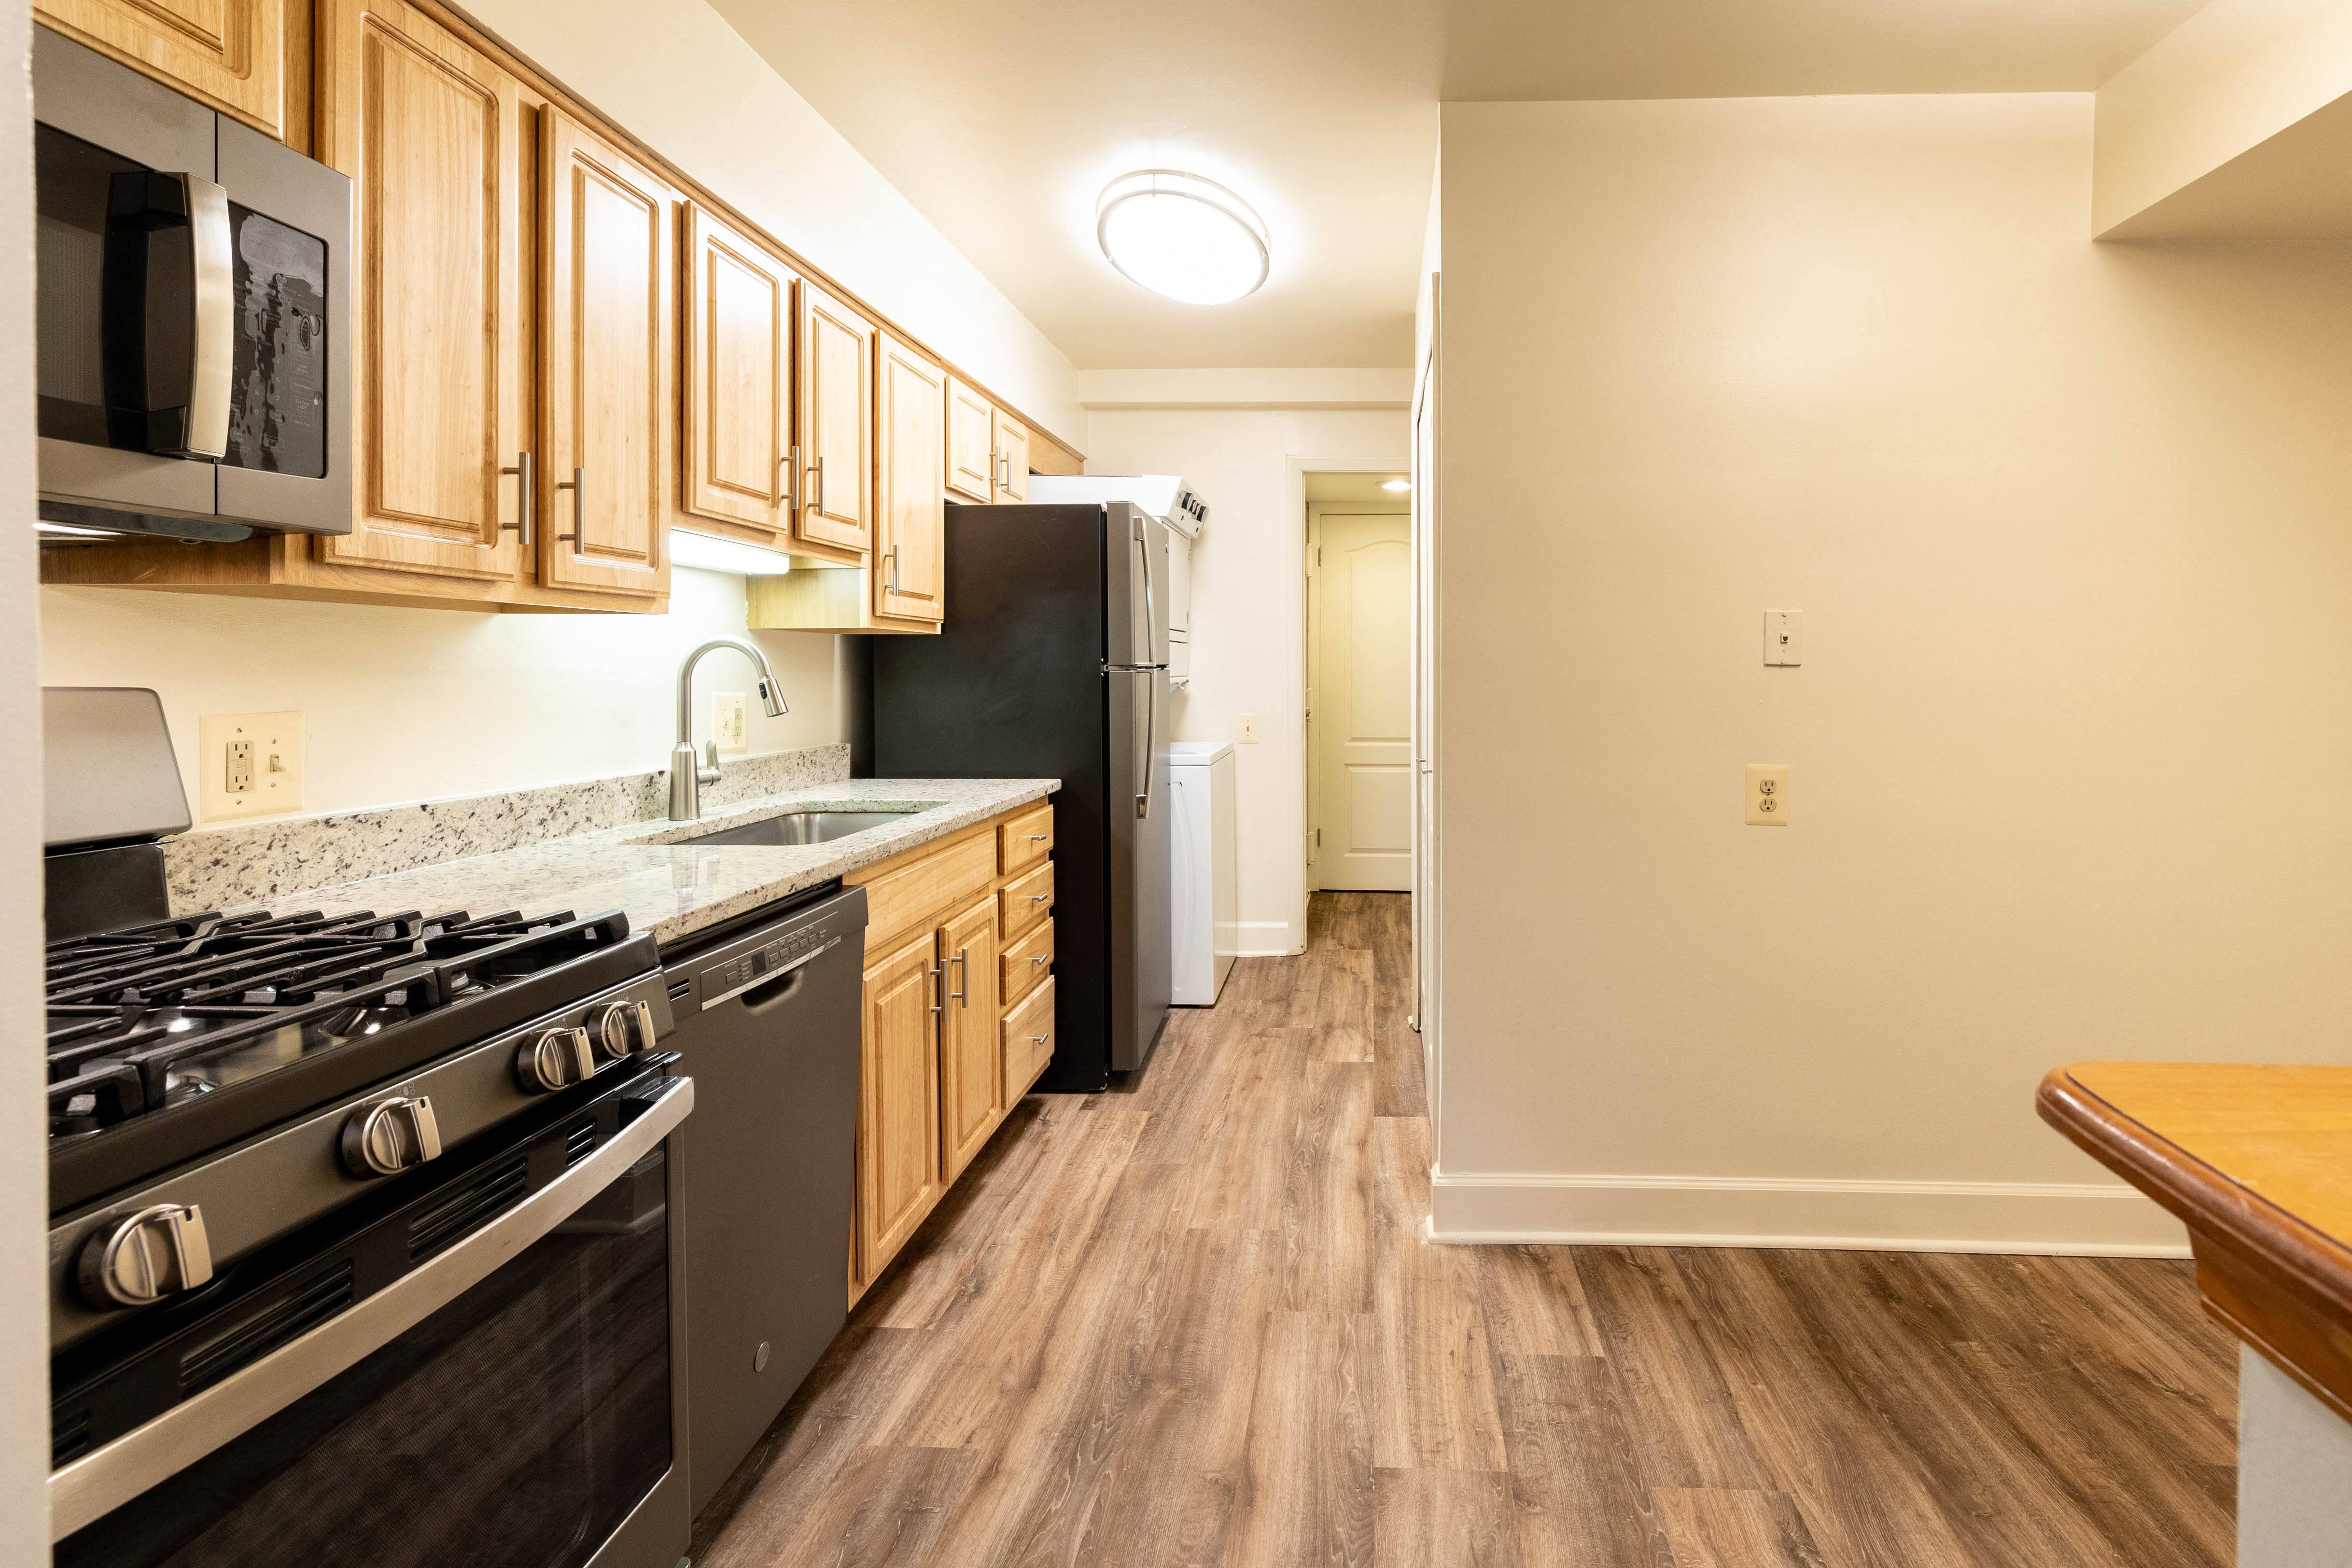 a kitchen with wooden cabinets and stainless steel appliances  at Charlesgate Apartments, Maryland, 21204